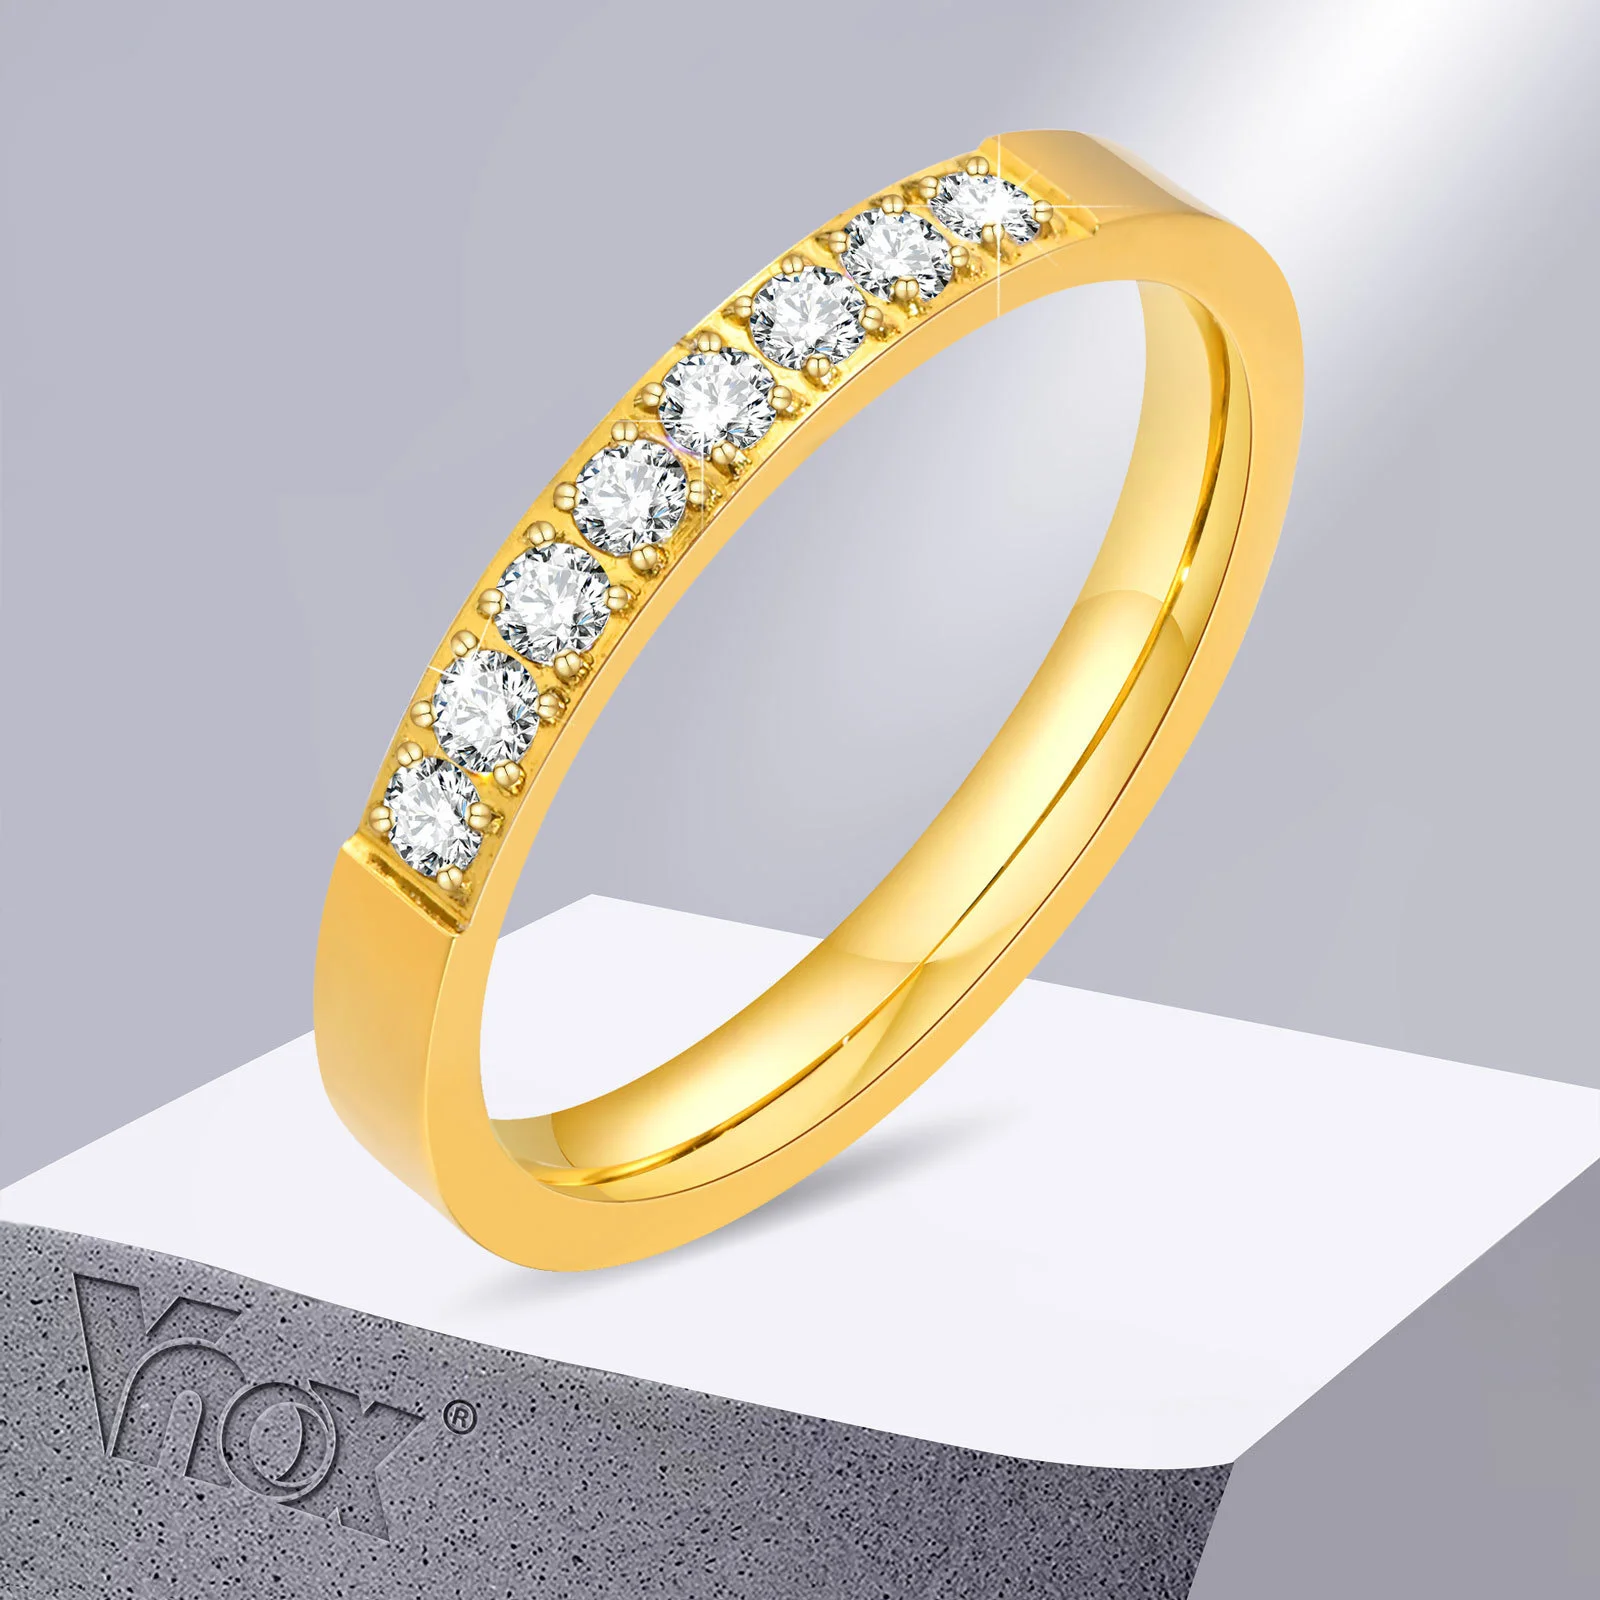 

Vnox 3mm Slim Women Rings, Gold Color Stainless Steel Finger Band with AAA CZ Stone Row, Bling Lady Girls Elegant Jewelry